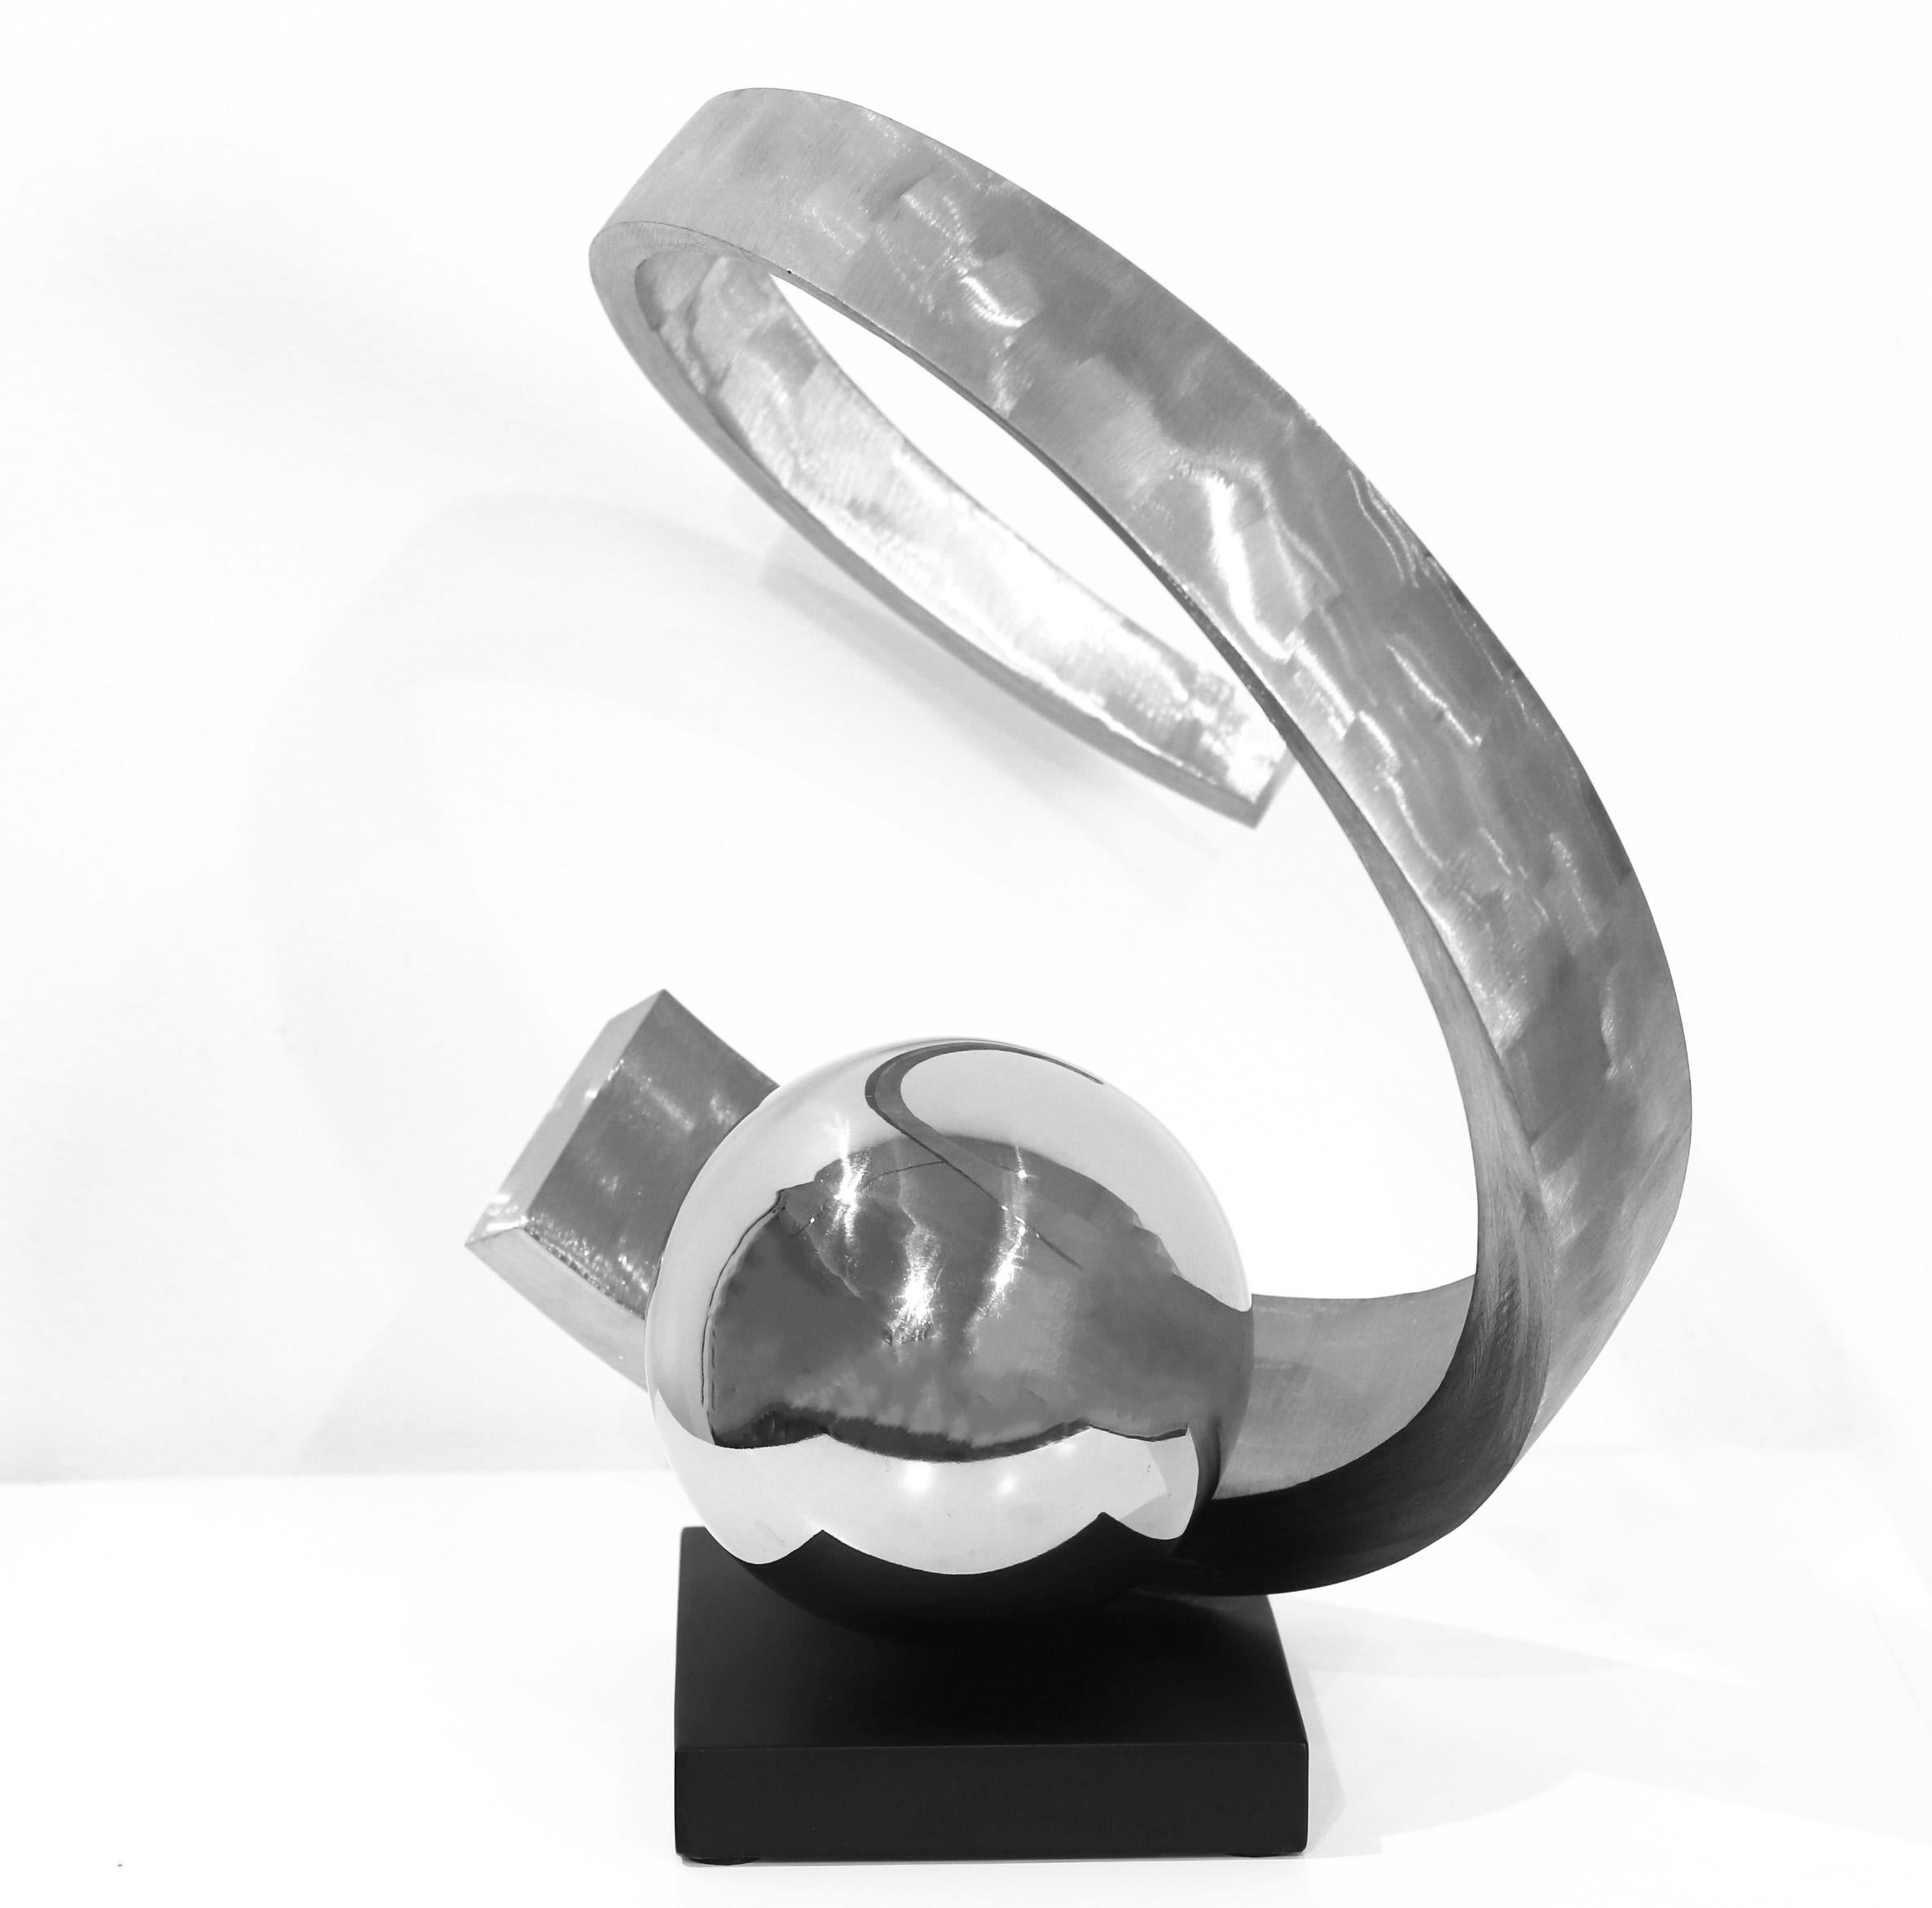 Follow Through - Original Sculpture Reflective and Matte Steel Ball and Circle For Sale 2